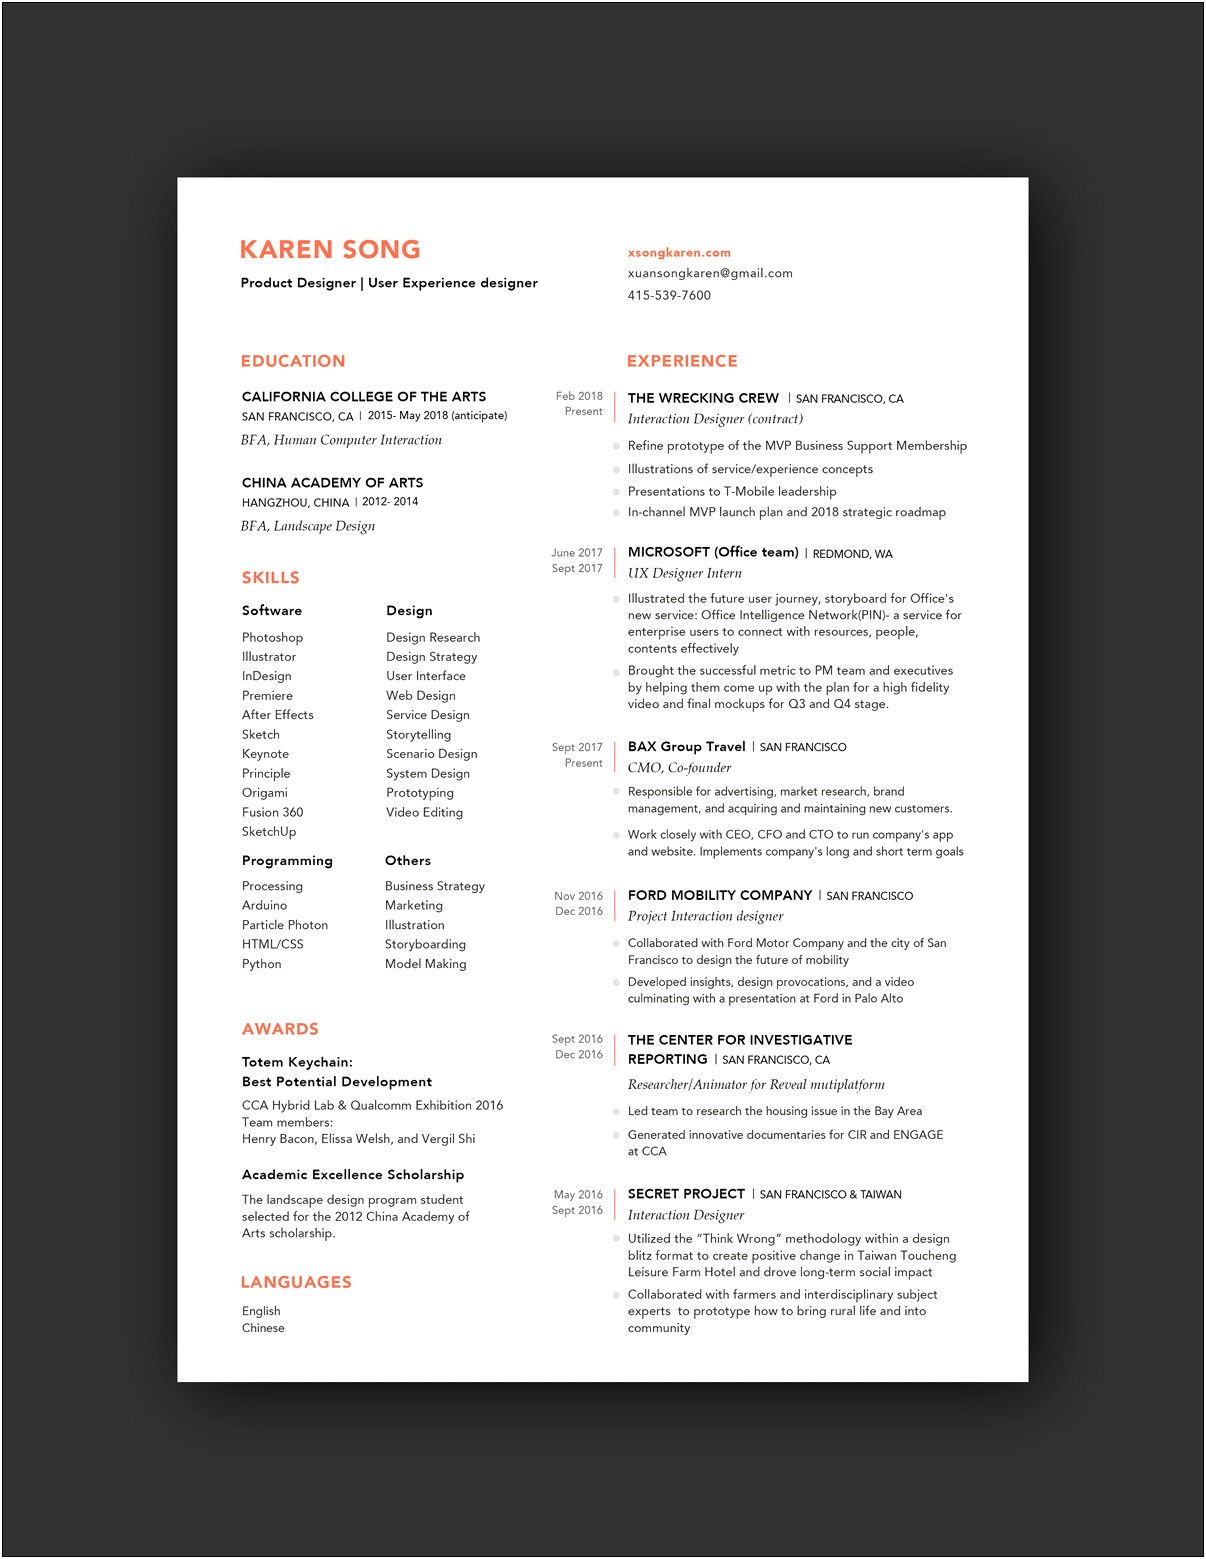 Resume Work And Travel Sample